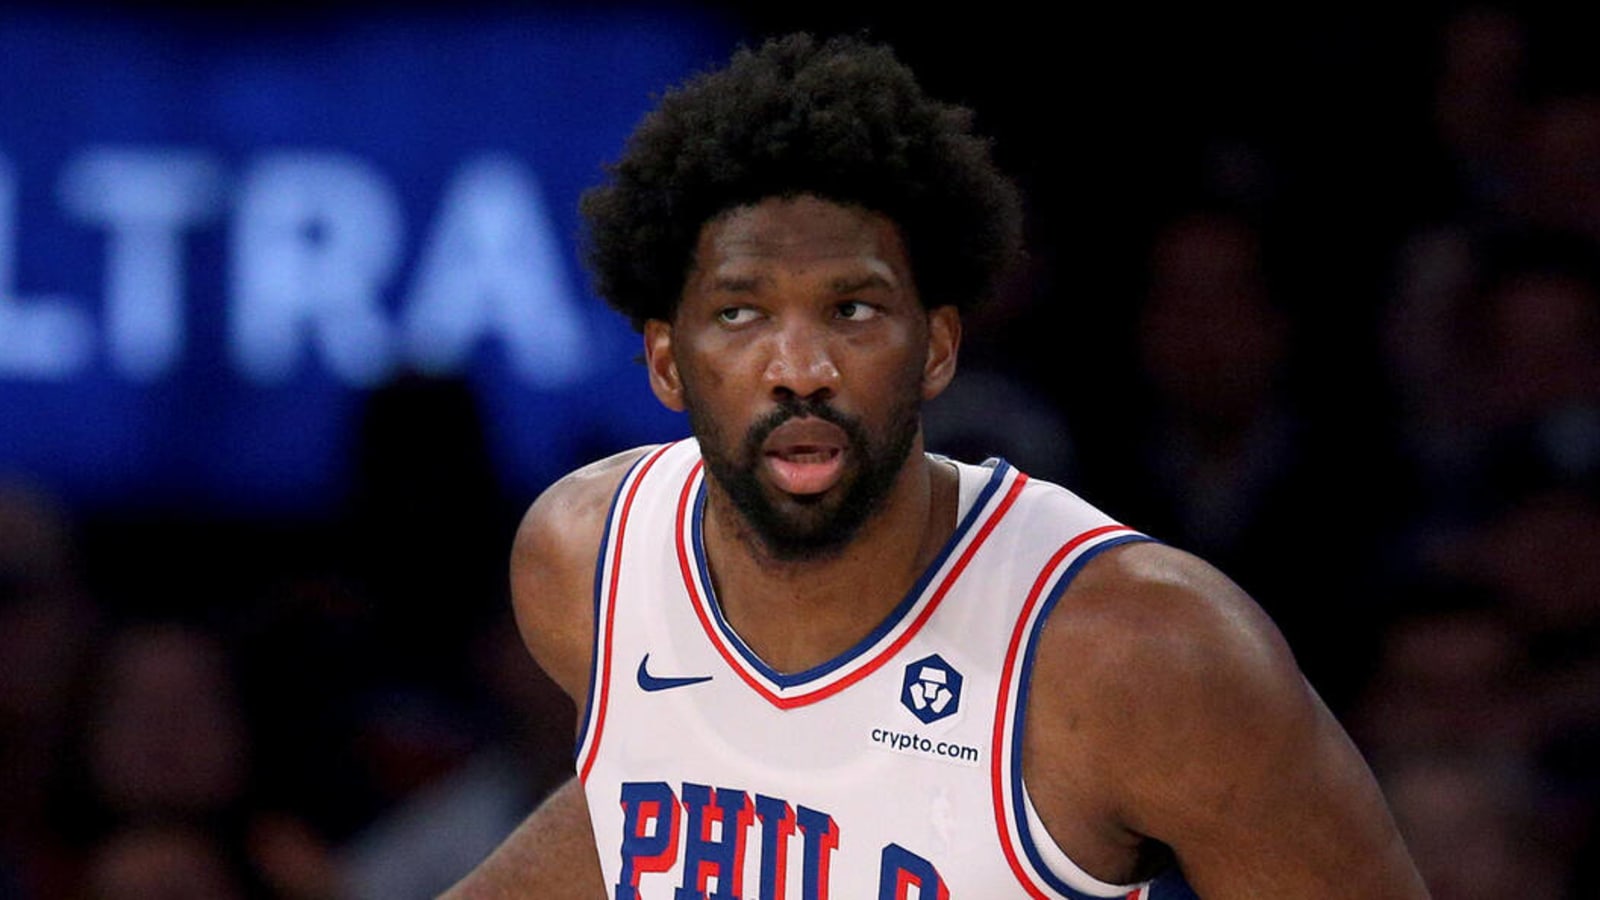 Knicks legend rips 76ers' Joel Embiid for 'crying too much' | Yardbarker